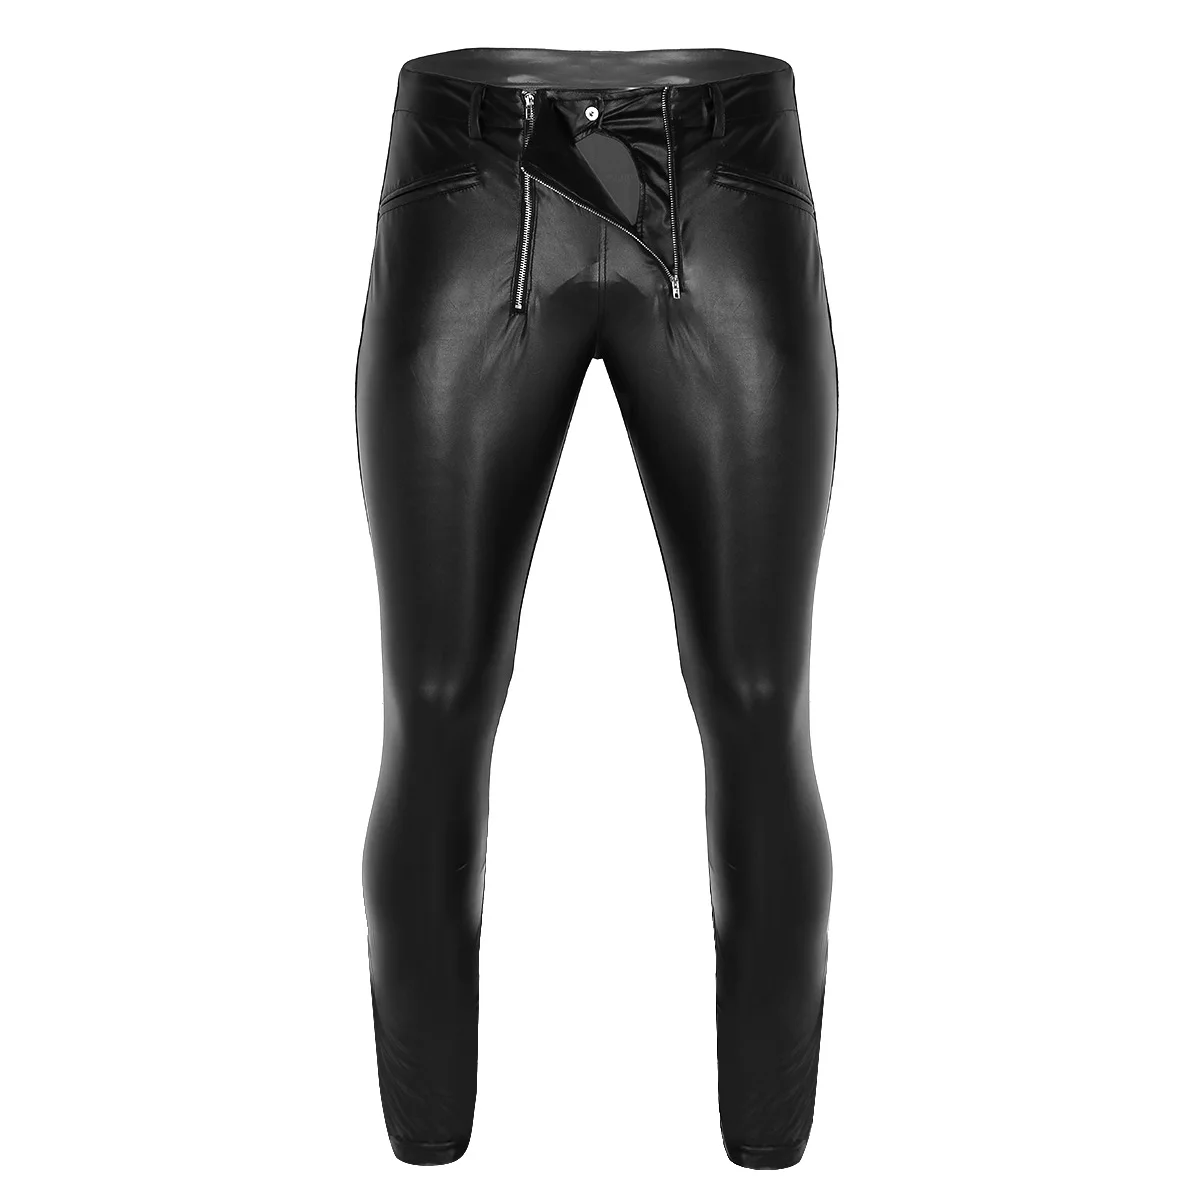 YOOJIA Men Faux Leather High Waist Tight Pant Stretchy Full Length Legging Trousers with Zipper Pouch Leotard Casual Pants